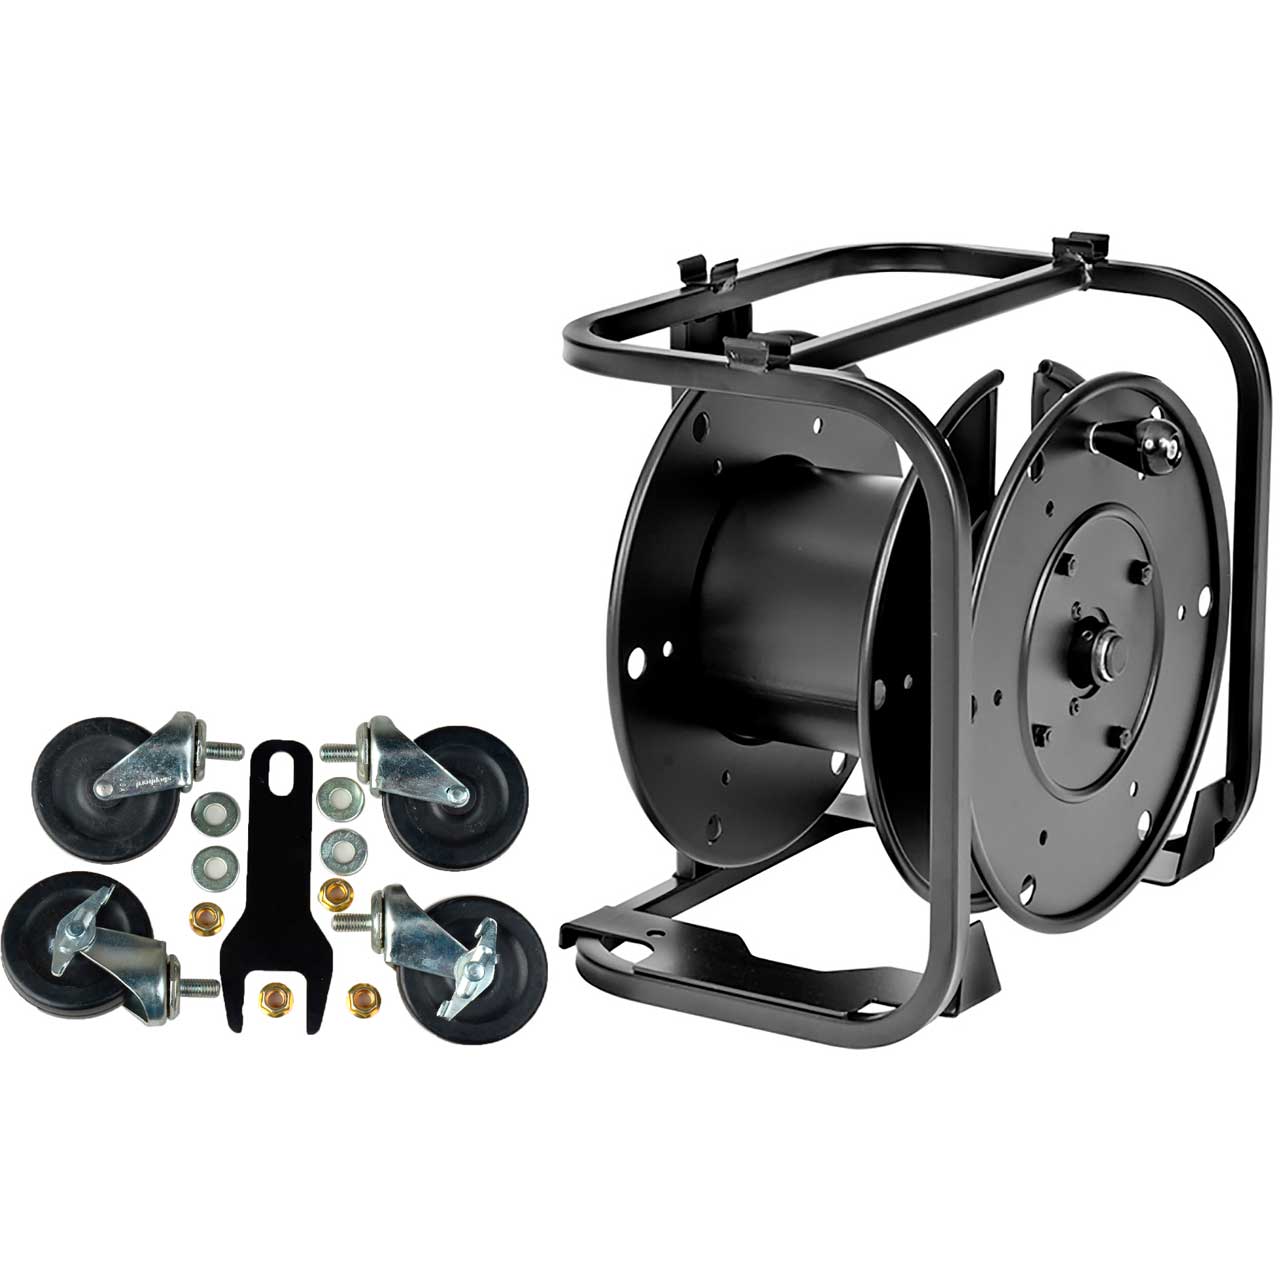 Hannay AVC16-10-11 Cable Reel Black